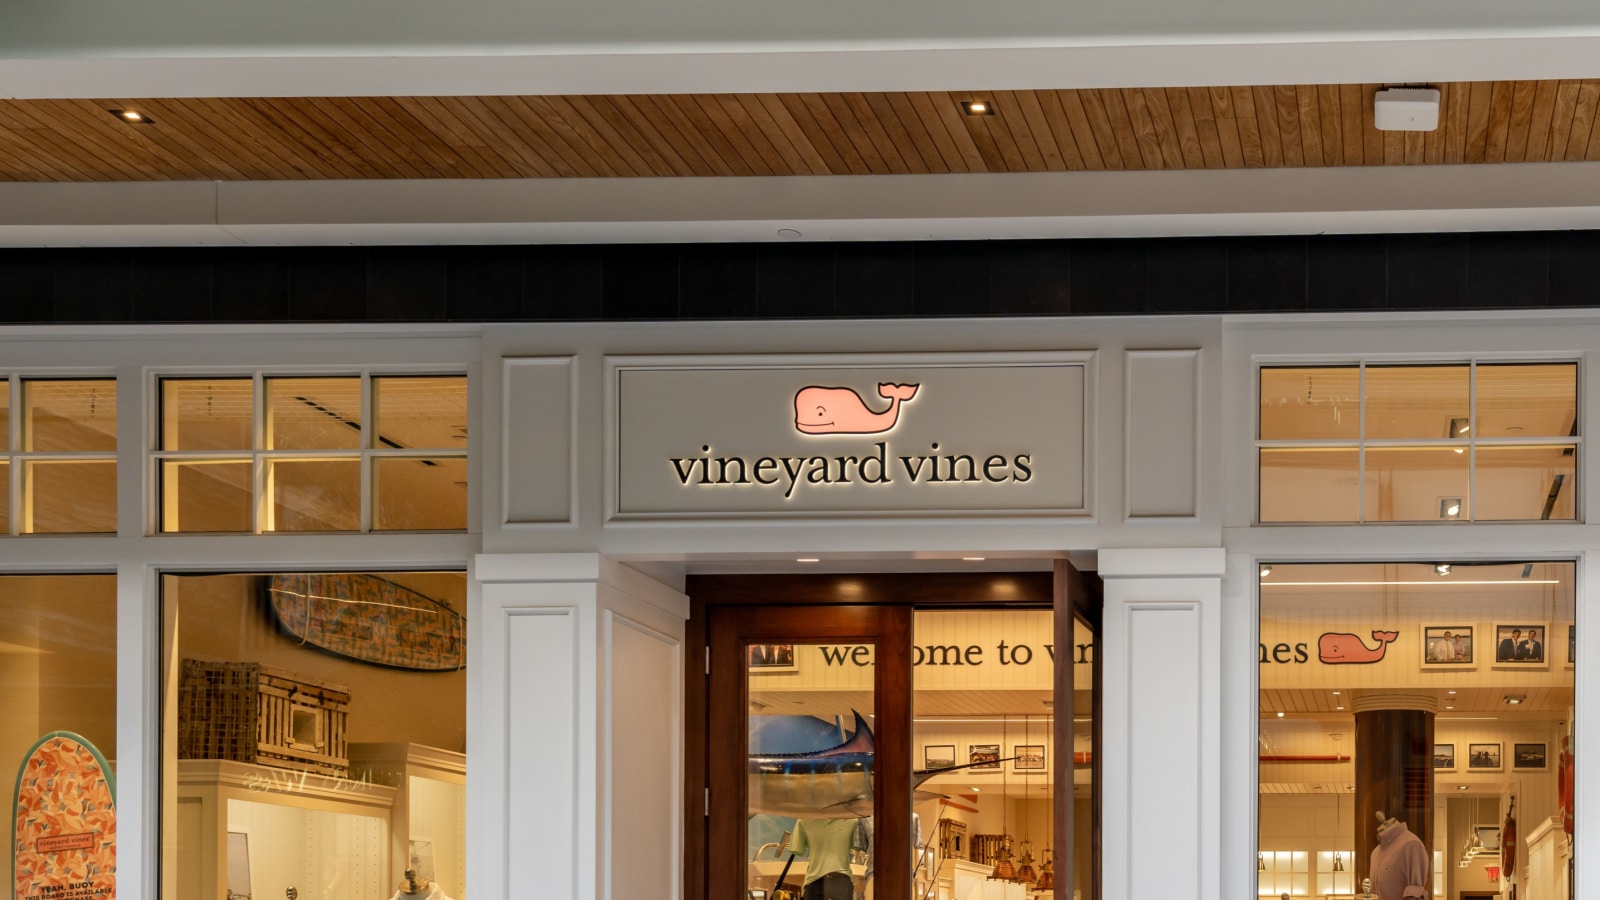 Los Angeles, California, USA - July 11, 2022: A Vineyard Vines store in a shopping mall. Vineyard Vines is an American clothing and accessory retailer.